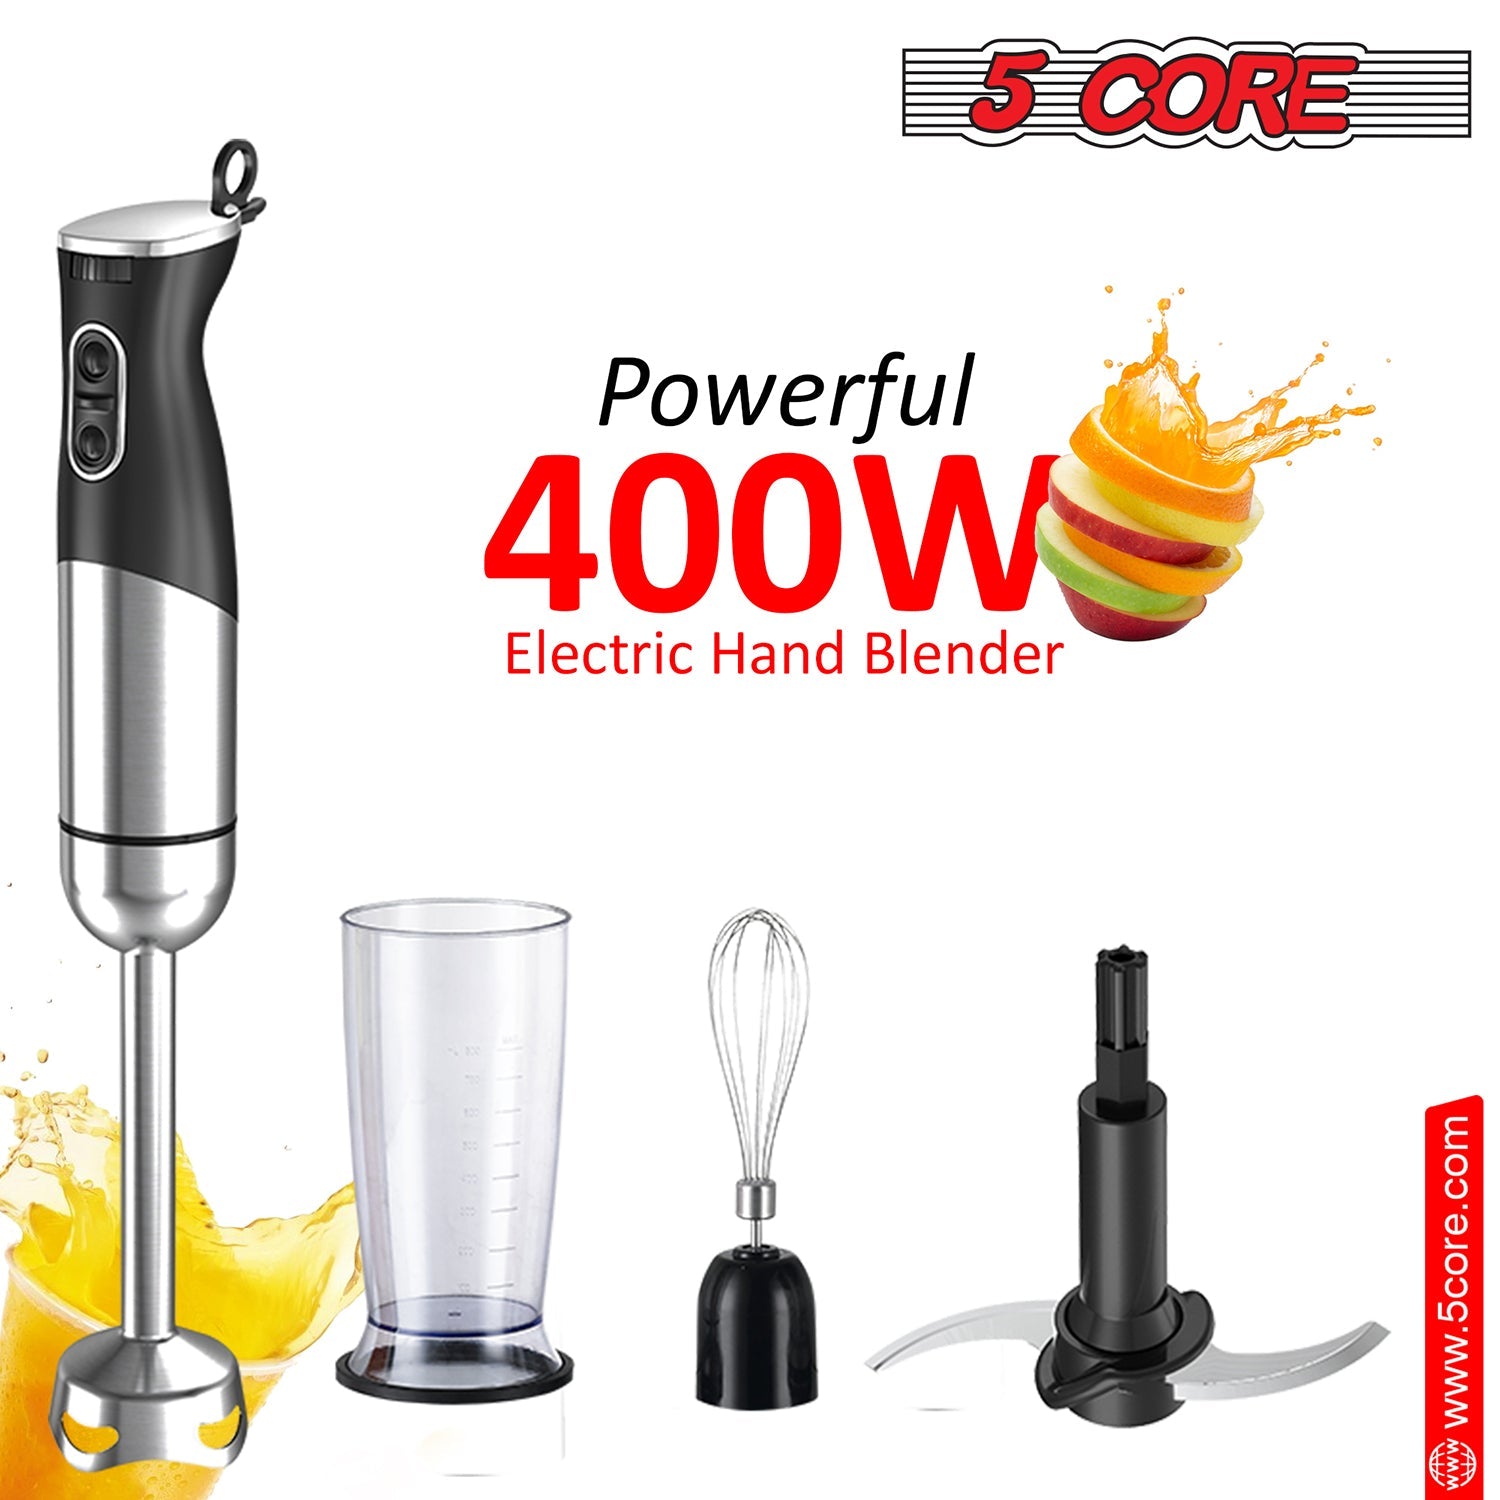 5 Core Immersion Hand Blender 400/500W Electric Hand Mixer Whisk w 2 Mixing Speed 304 Steel Blades-1